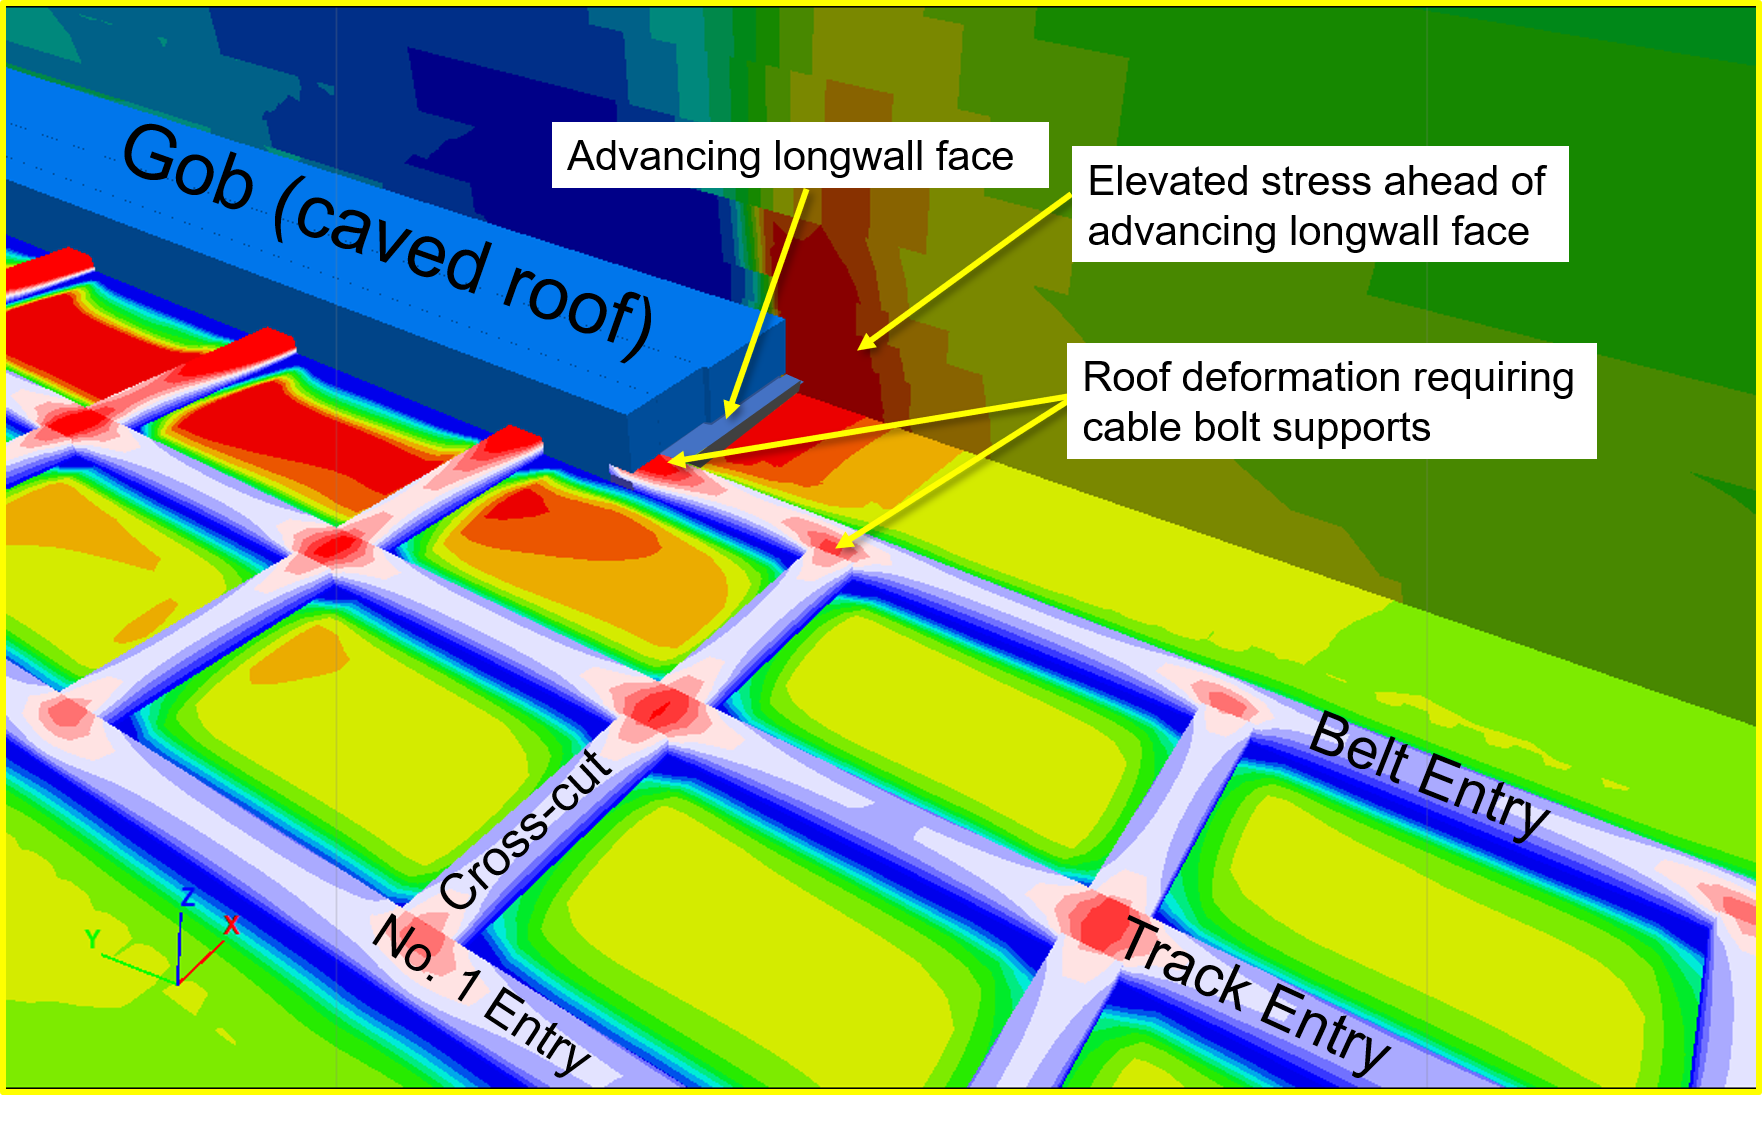 A heatmap numerical model analysis of stress and deformation in gateroads.